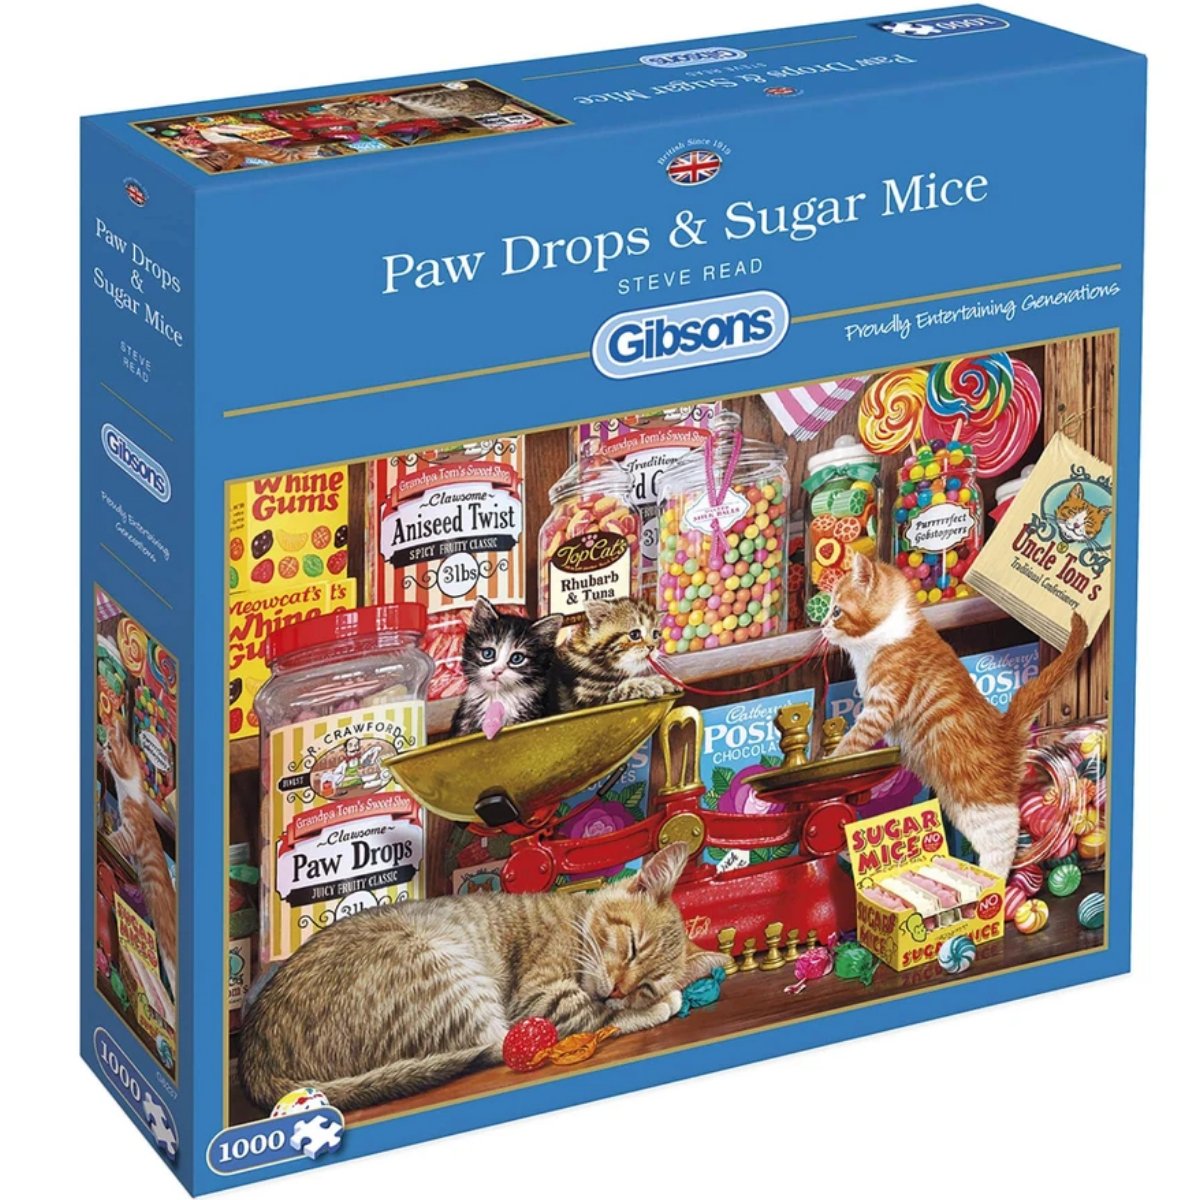 Gibsons Paw Drops & Sugar Mice Jigsaw Puzzle (1000 Pieces) - Phillips Hobbies